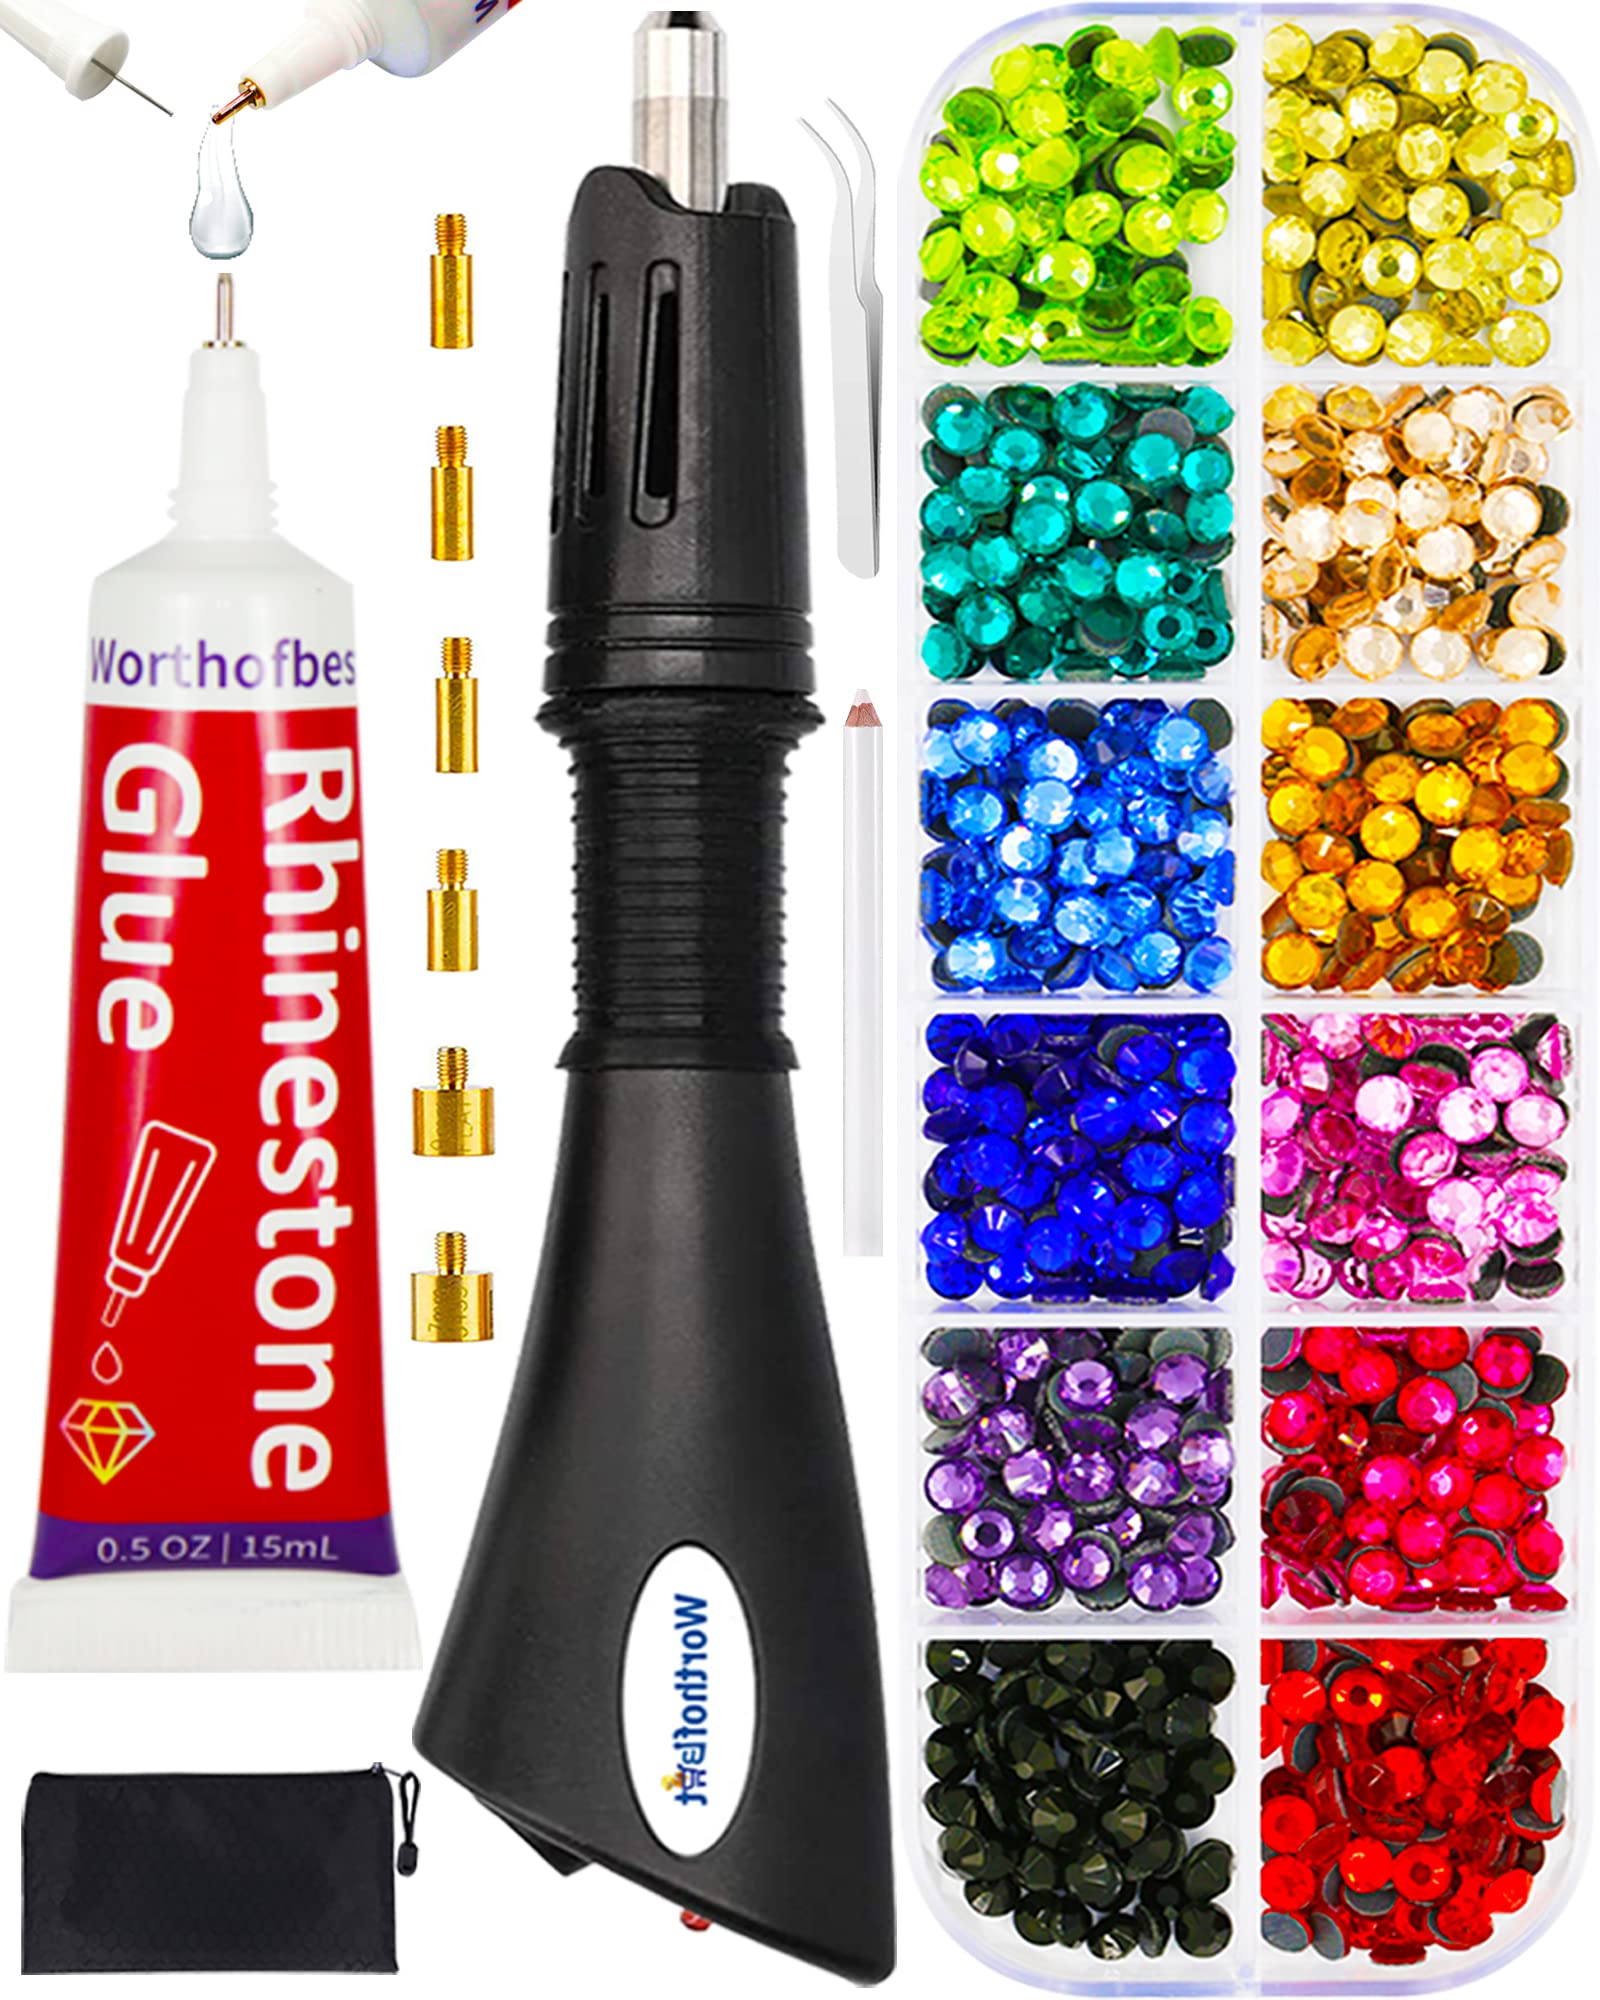 Hotfix Rhinestone Applicator, Bedazzler Kit With Rhinestones For Clothes  Crafts